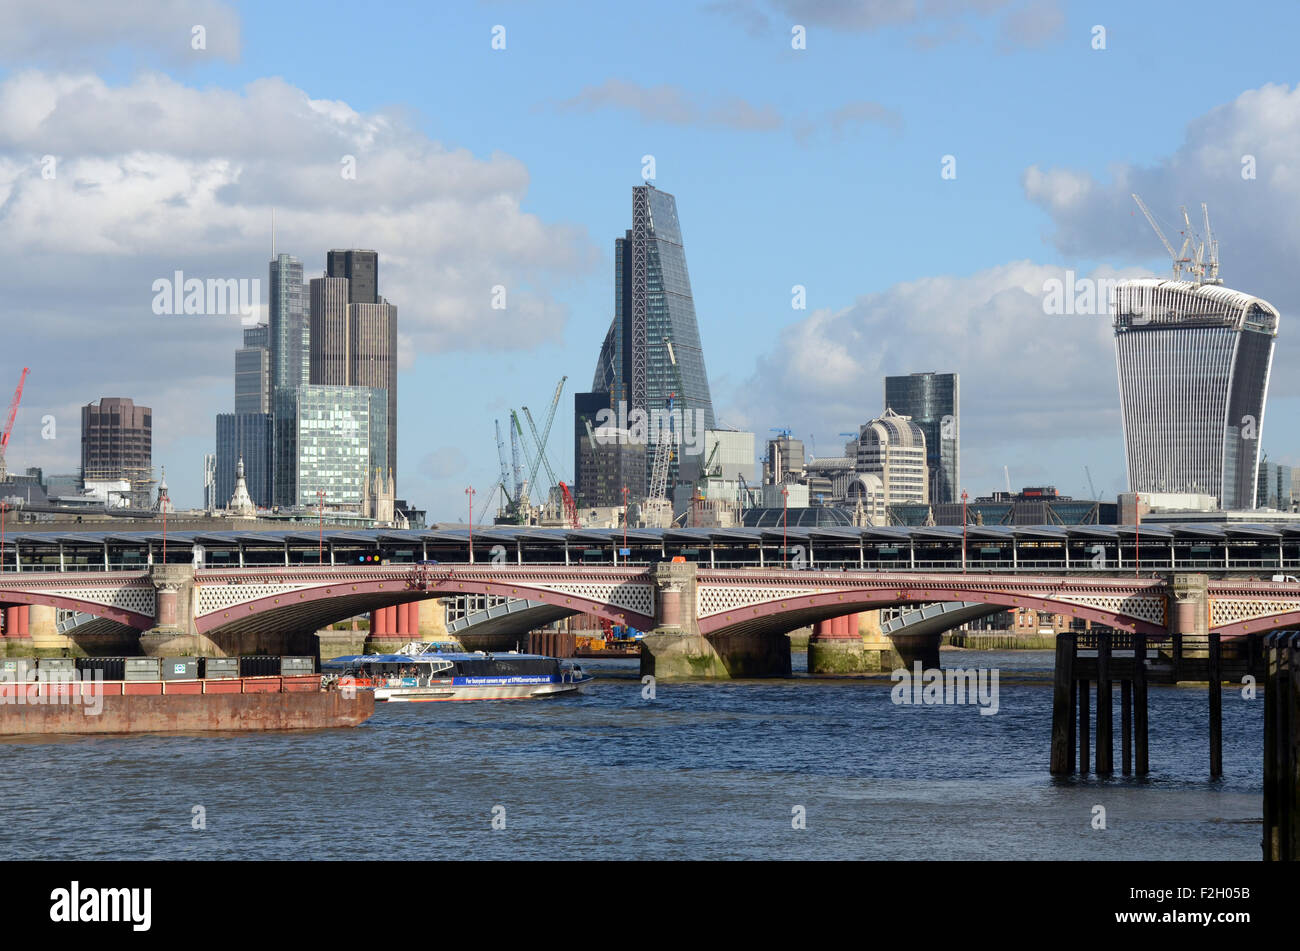 London, UK, 21/02/2014, The Cheese grater building behind Blackfriars Bridge. View of the Thames on a sunny day. Stock Photo